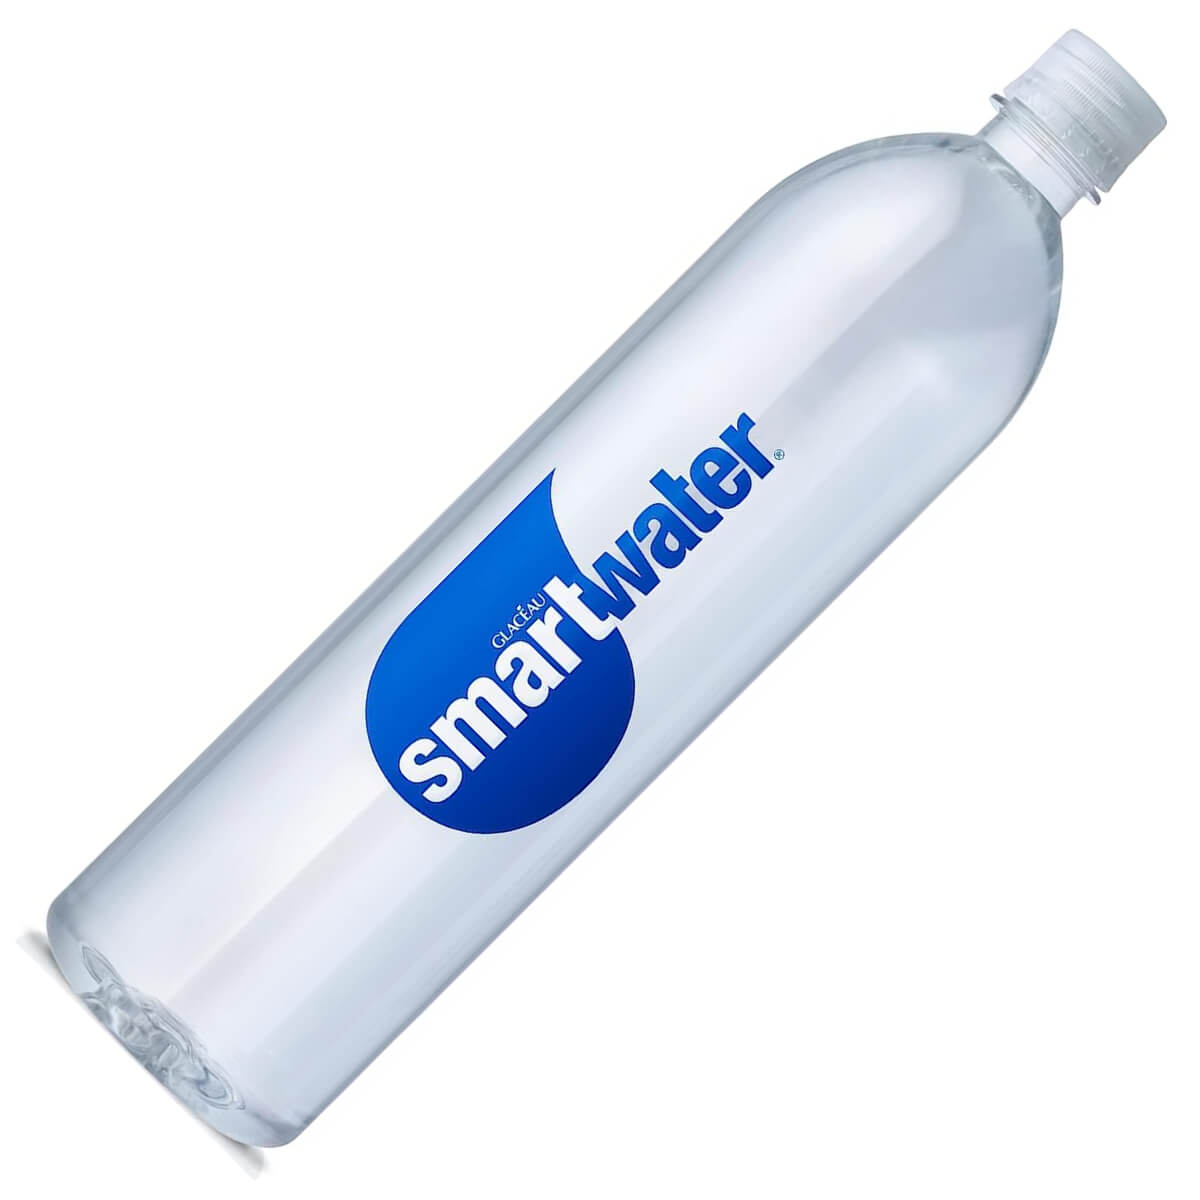 SmartWater Bottle to mount a squeeze filter